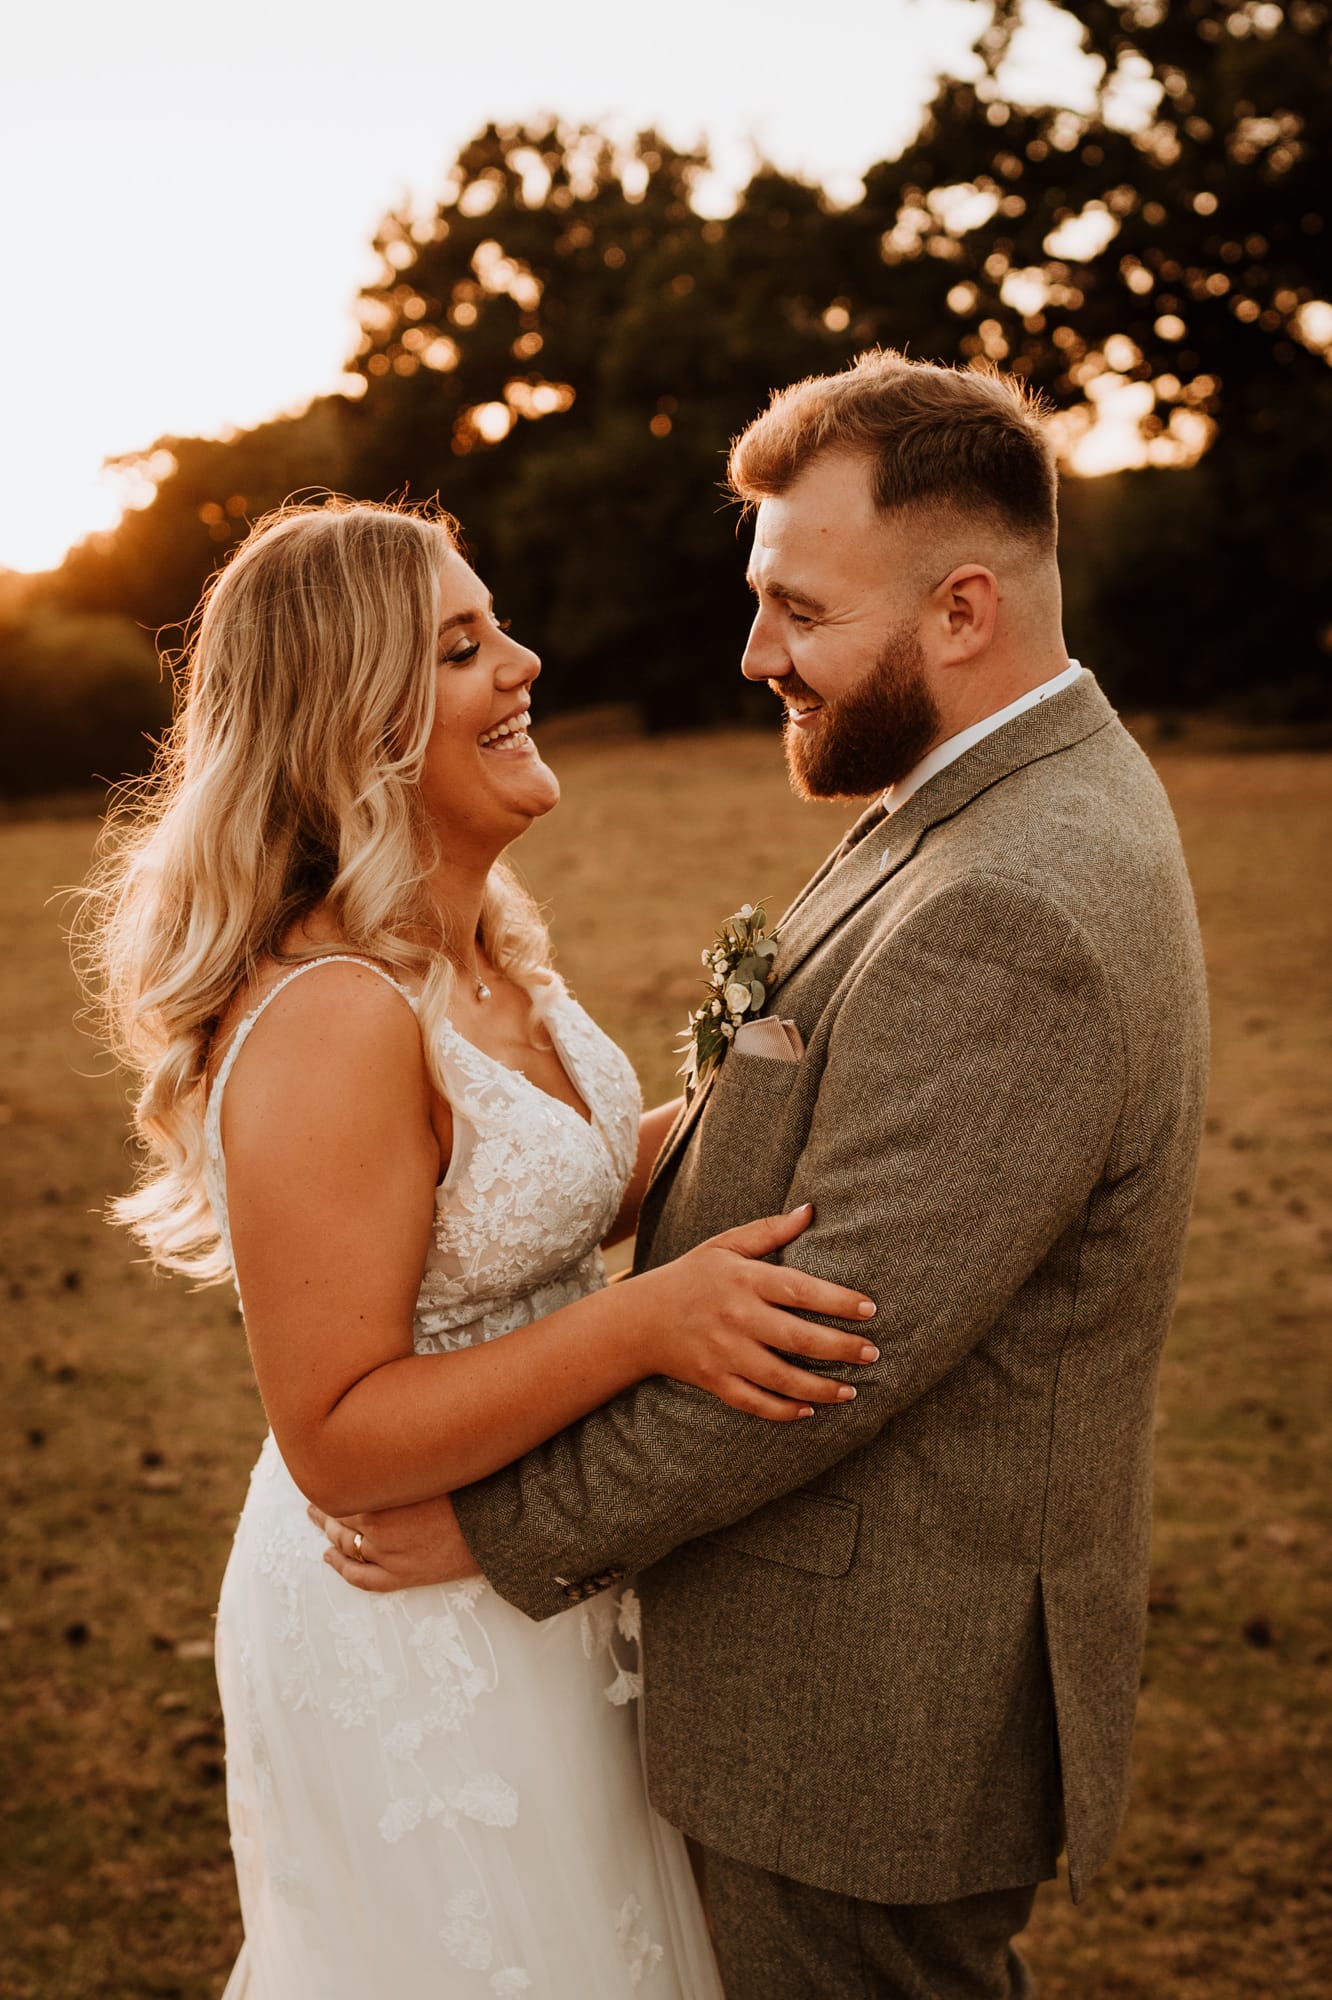 Bride and Groom laughing together at their Kent wedding venue